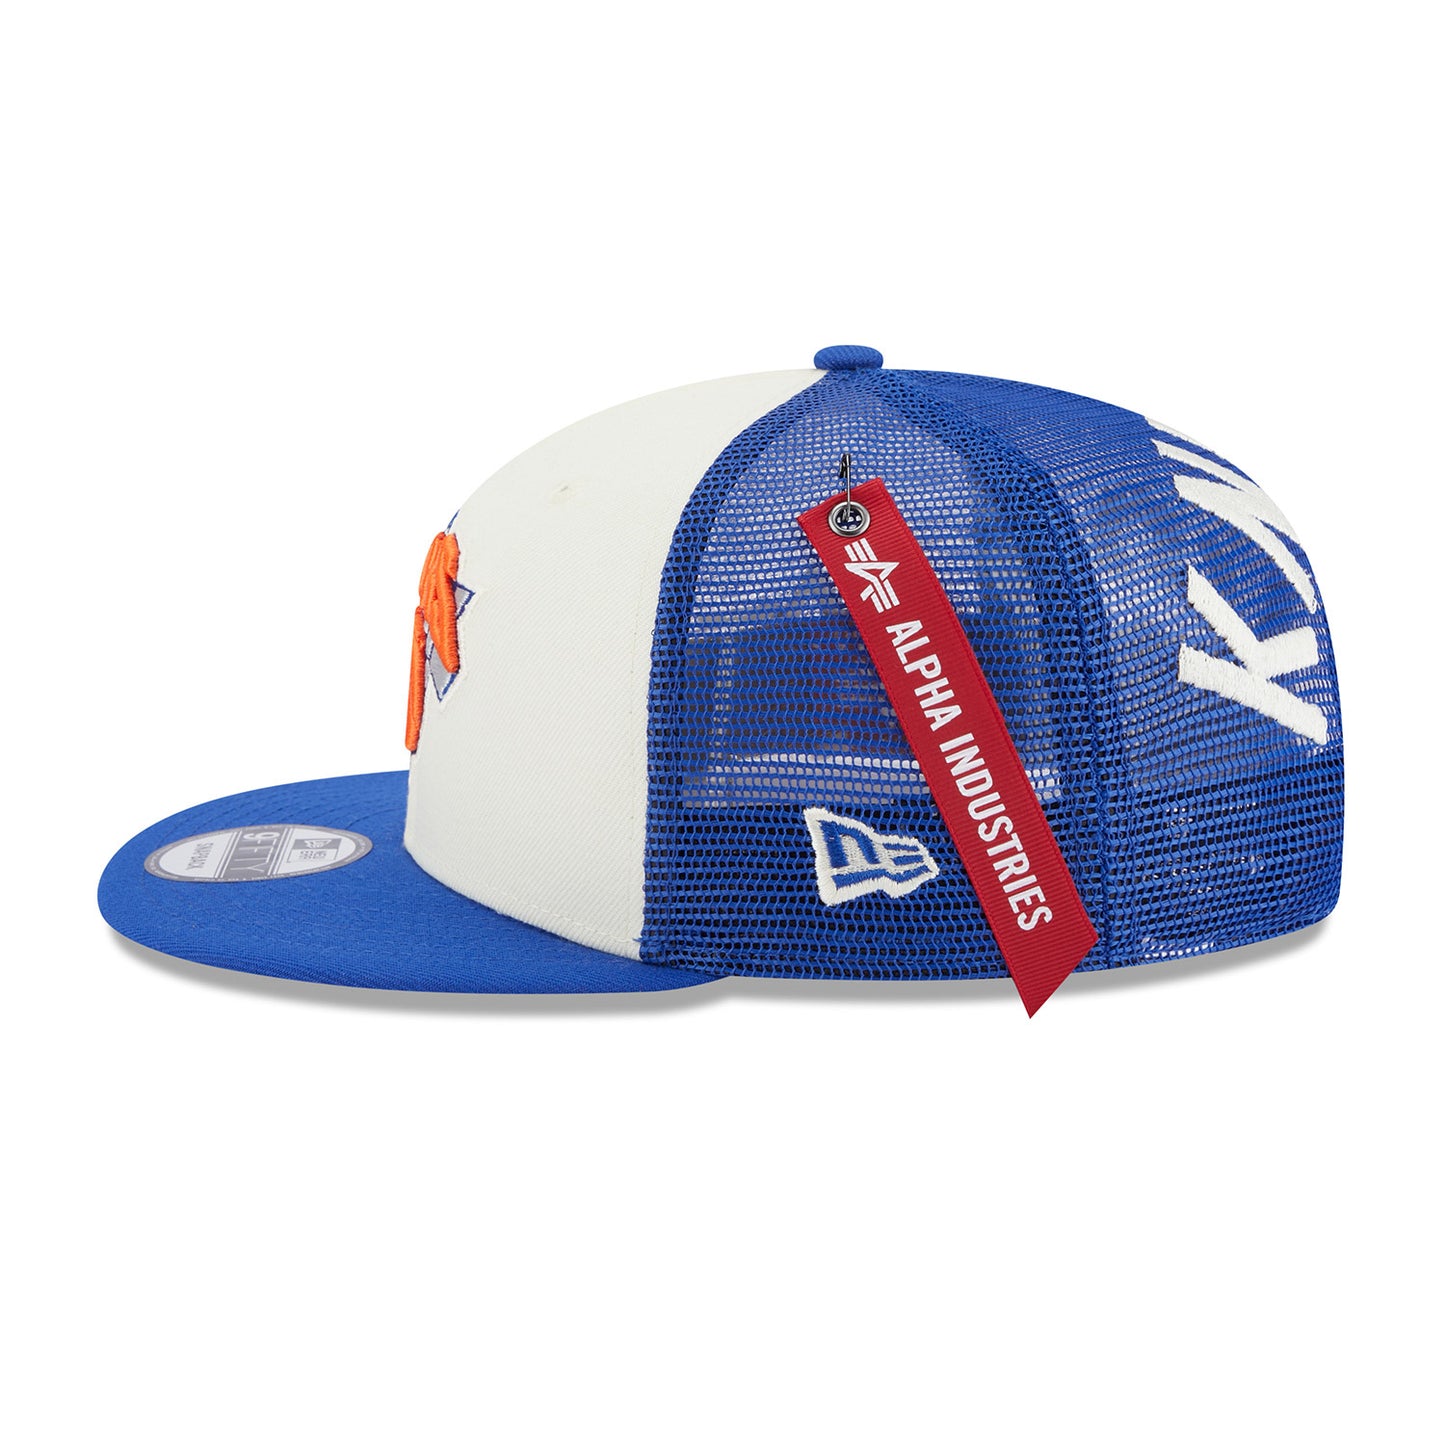 New Era Knicks Alpha Collection Snapback Hat In Blue & White - Left Side View